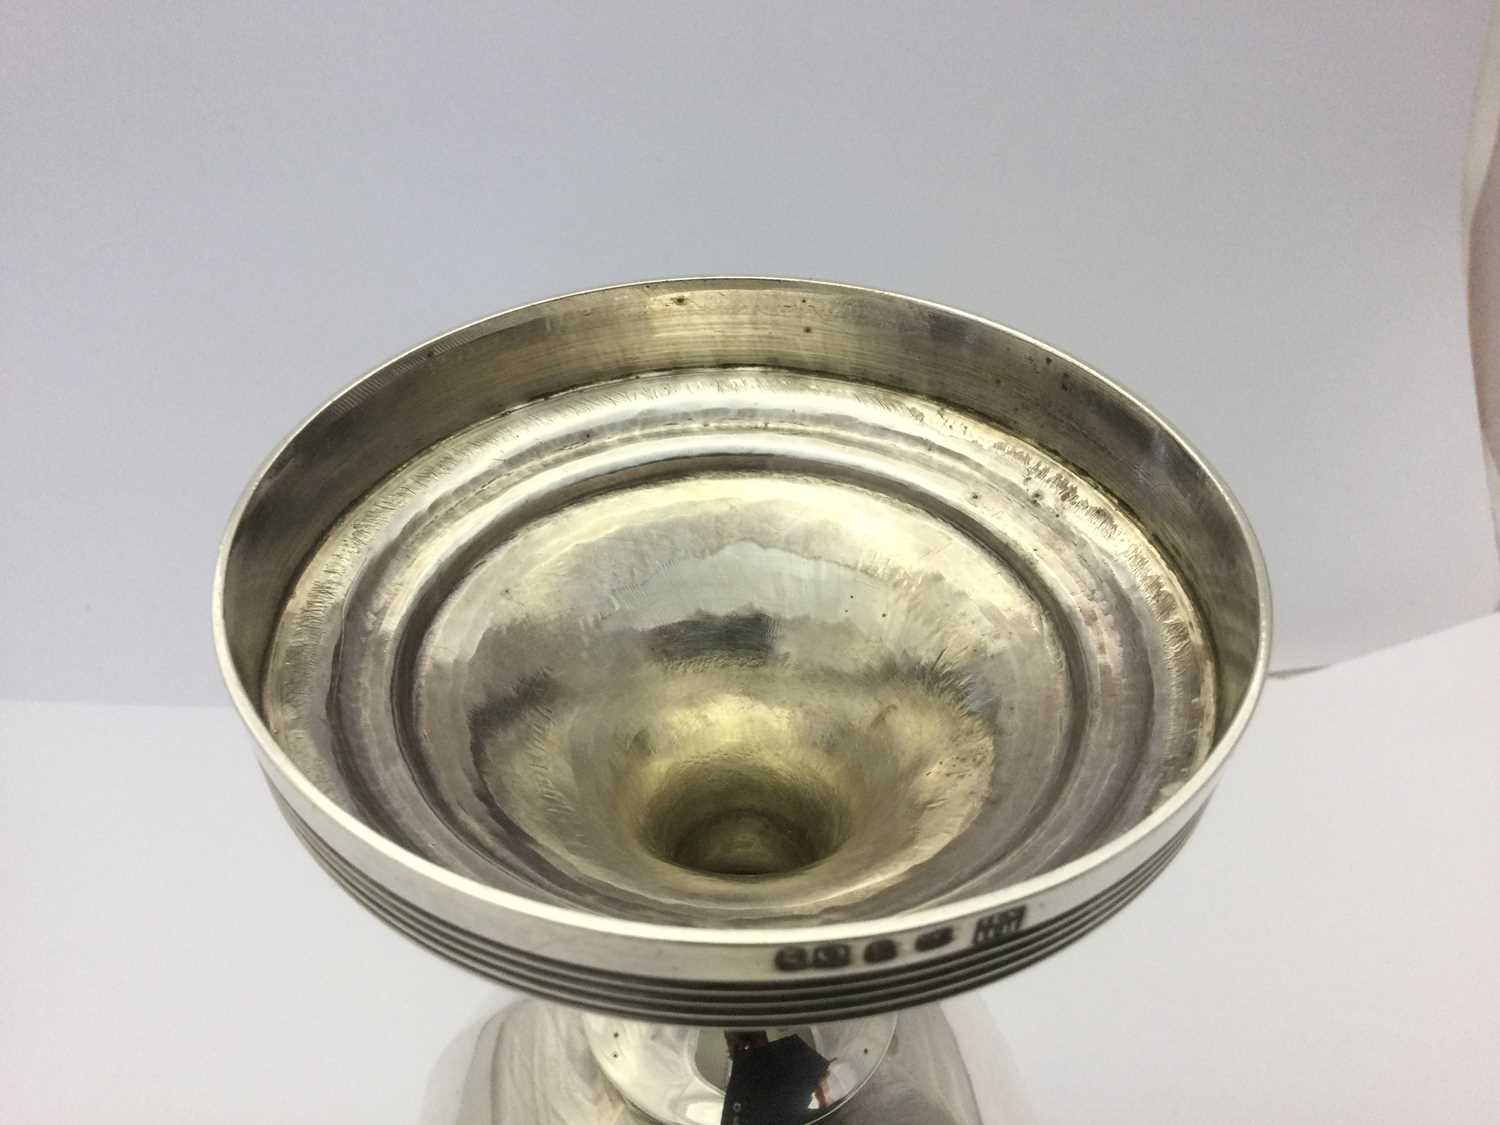 A George III Silver Goblet, by Robert Hennell and Samuel Hennell, London, 1809 - Image 7 of 7